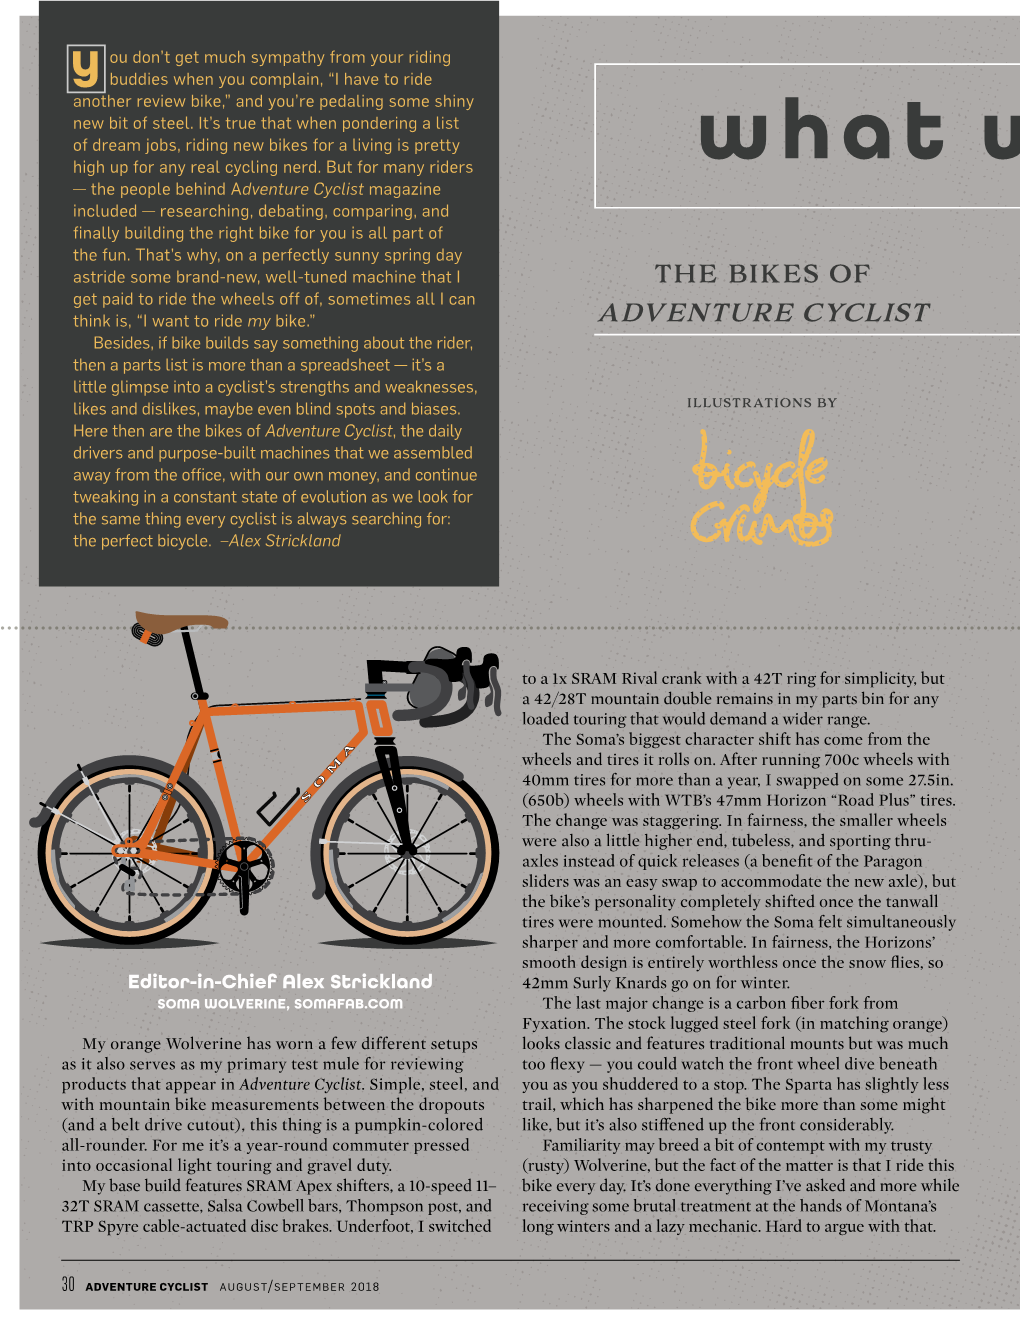 The Bikes of Adventure Cyclist